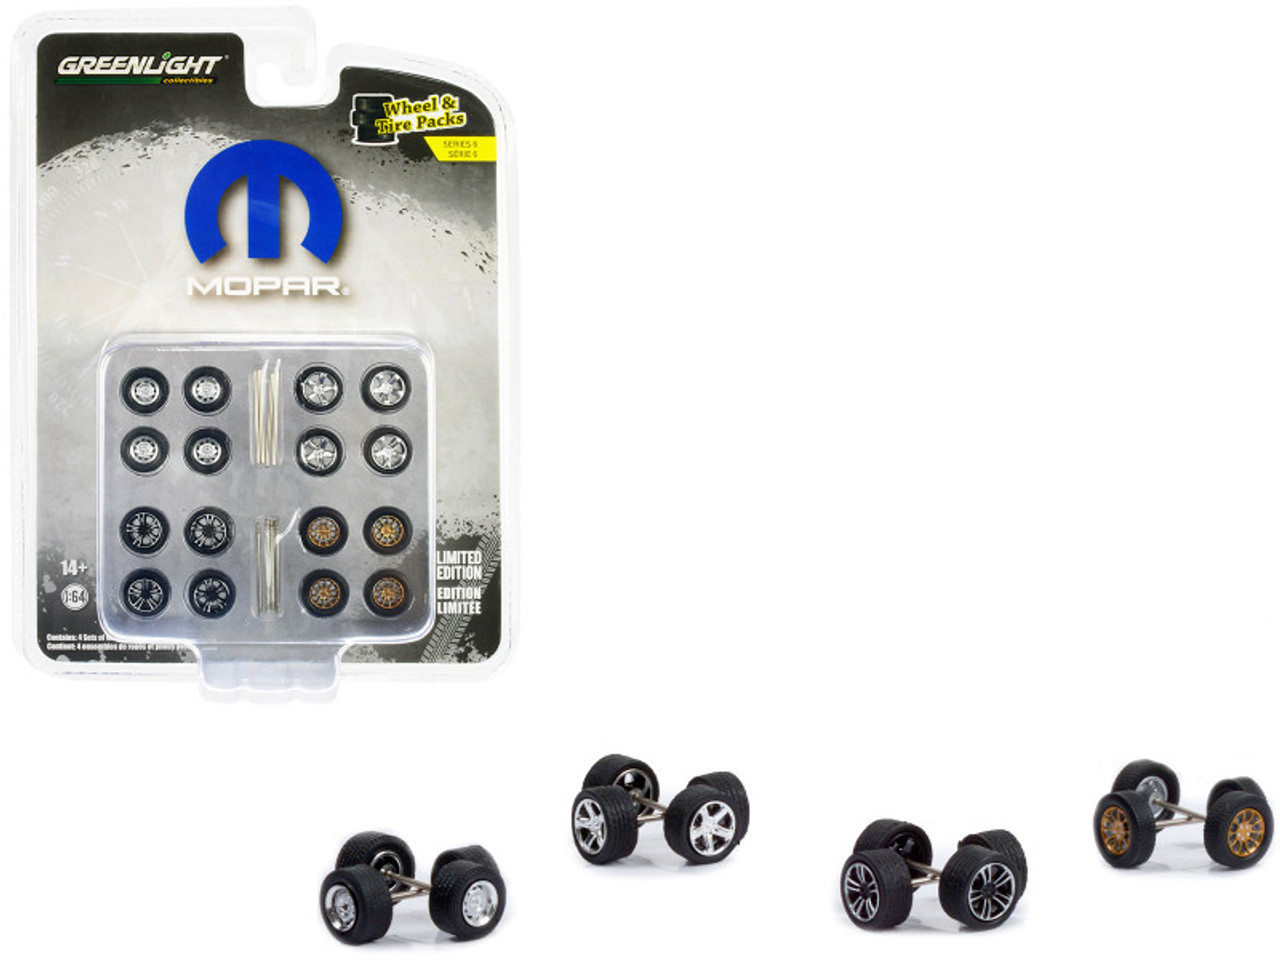 "Mopar" Wheels and Tires Multipack Set of 24 pieces "Wheel & Tire Packs" Series 6 1/64 Scale Models by Greenlight